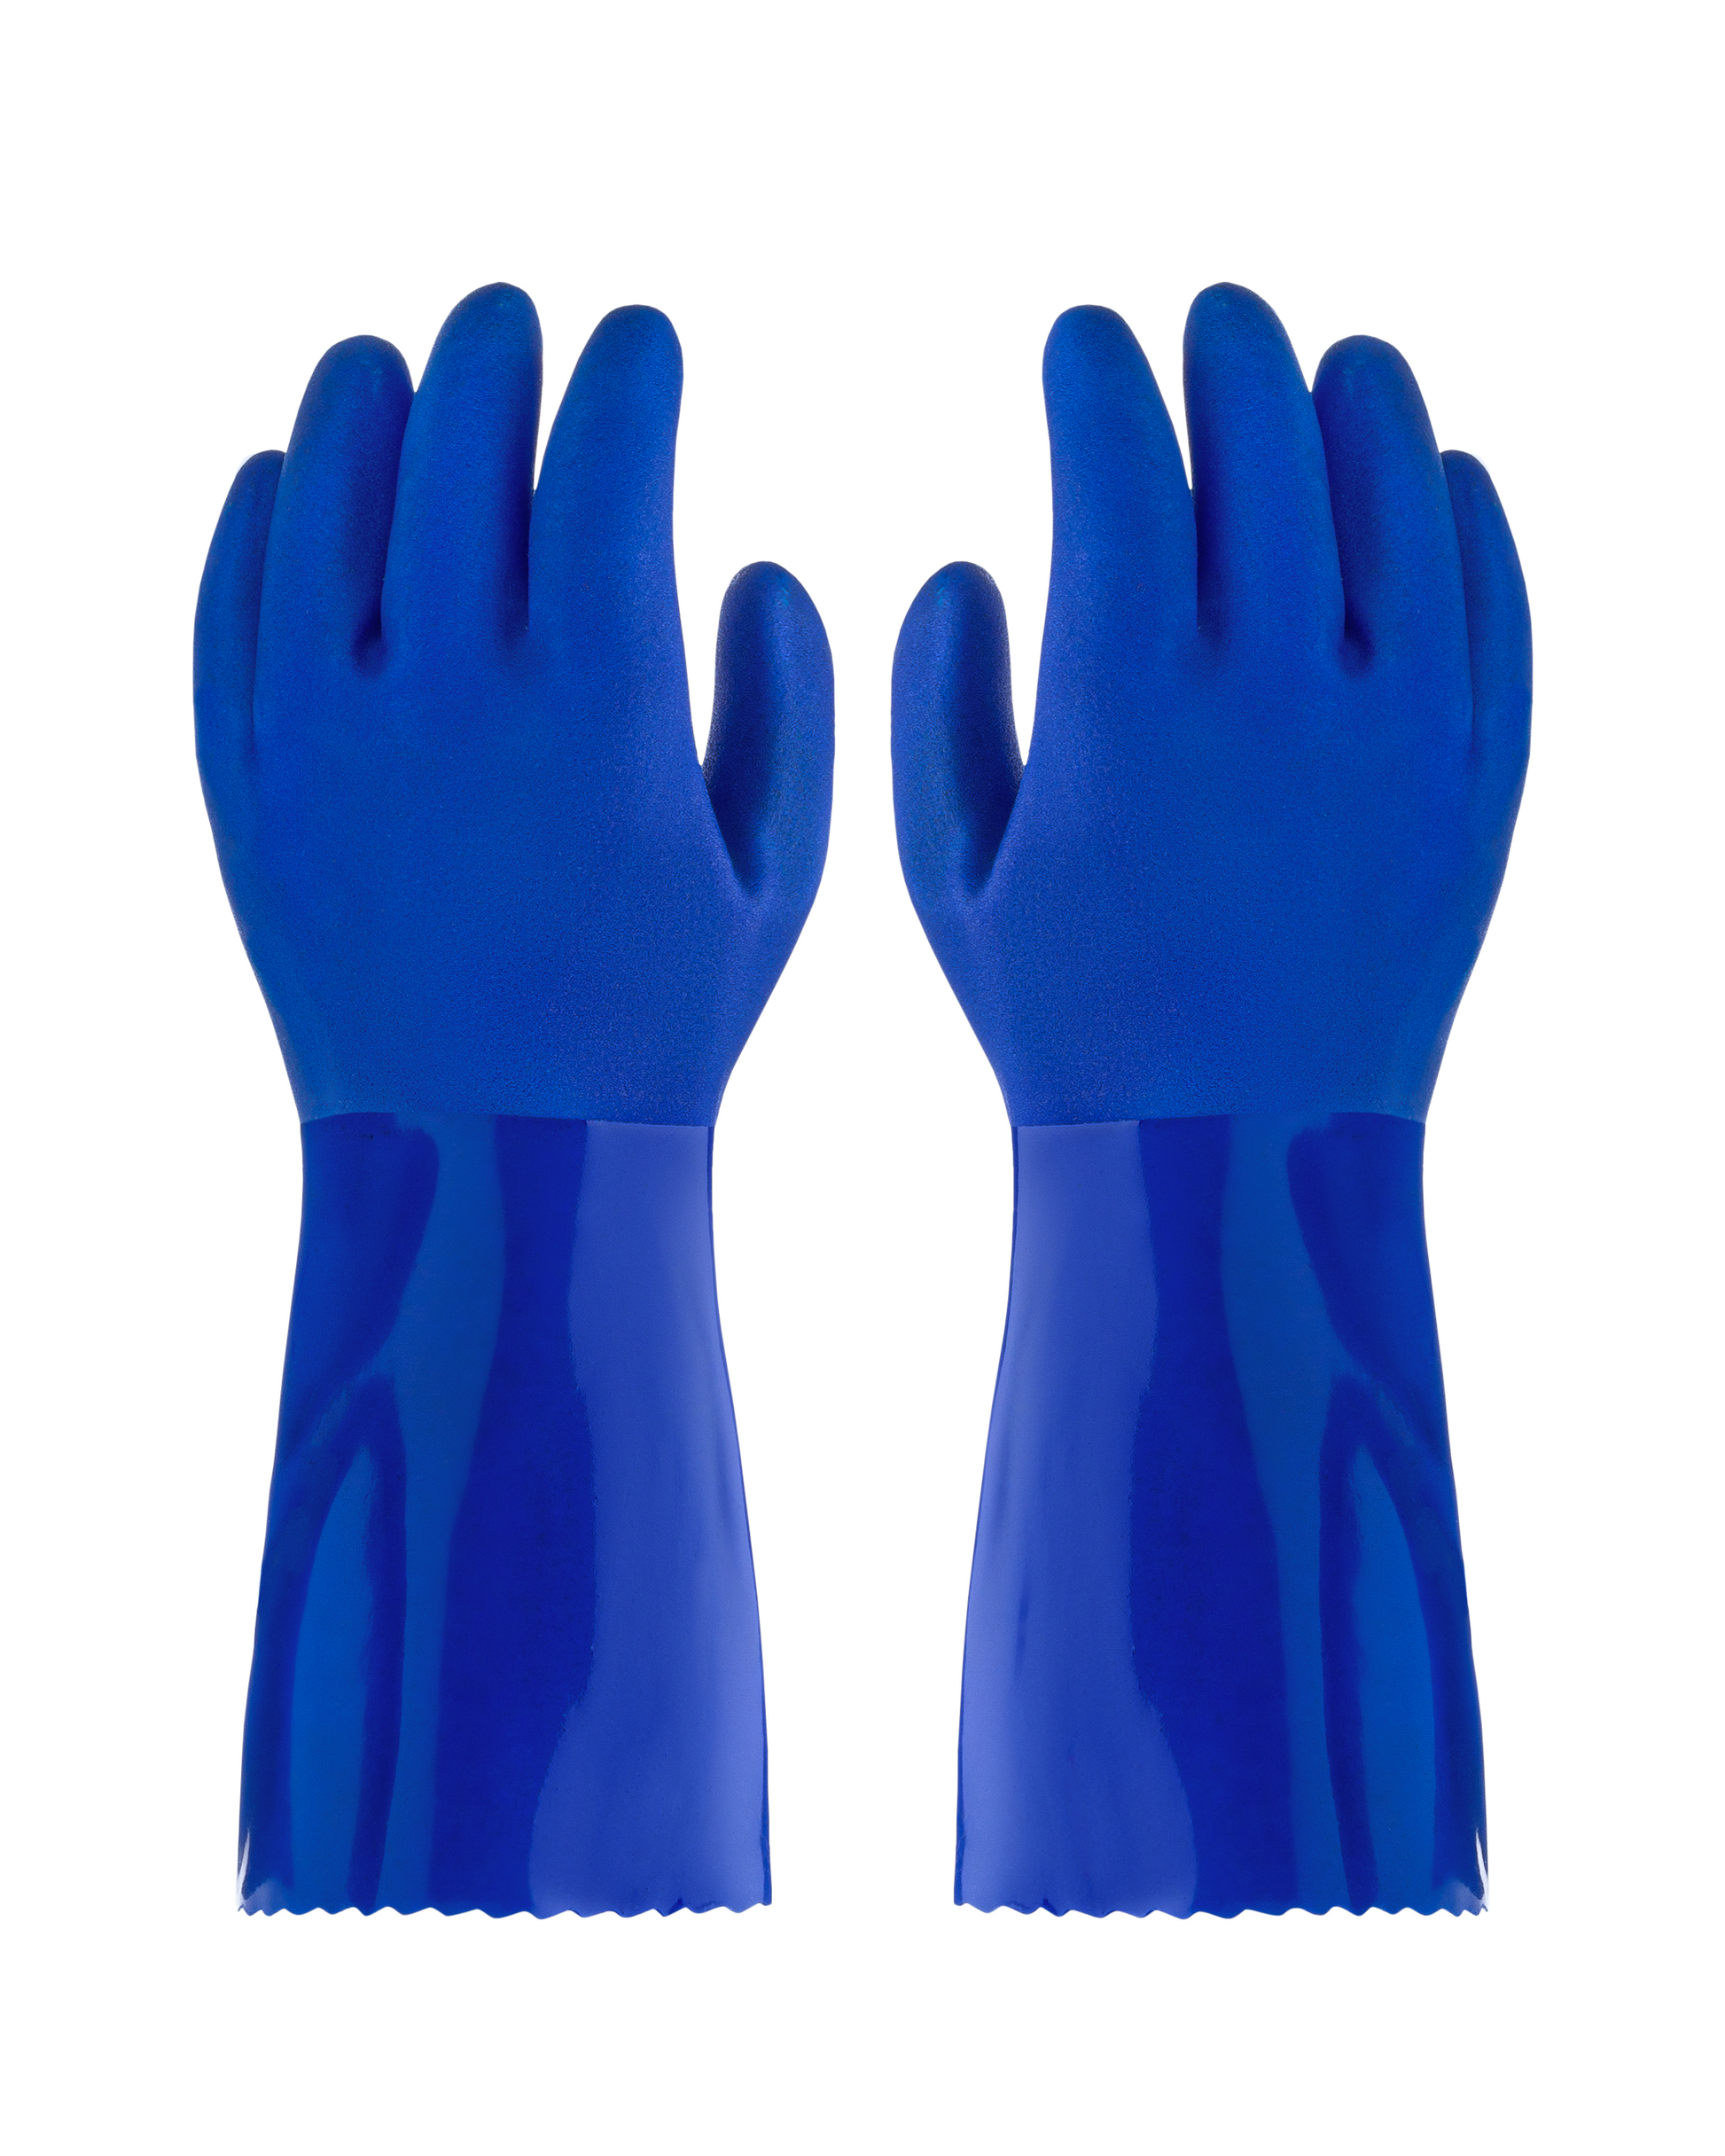 Tired of flimsy gloves that don't provide the protection you need? Upgrade to Kitchen-Star Ultimate Rubber Household PVC Gloves, the perfect combination of comfort and durability.